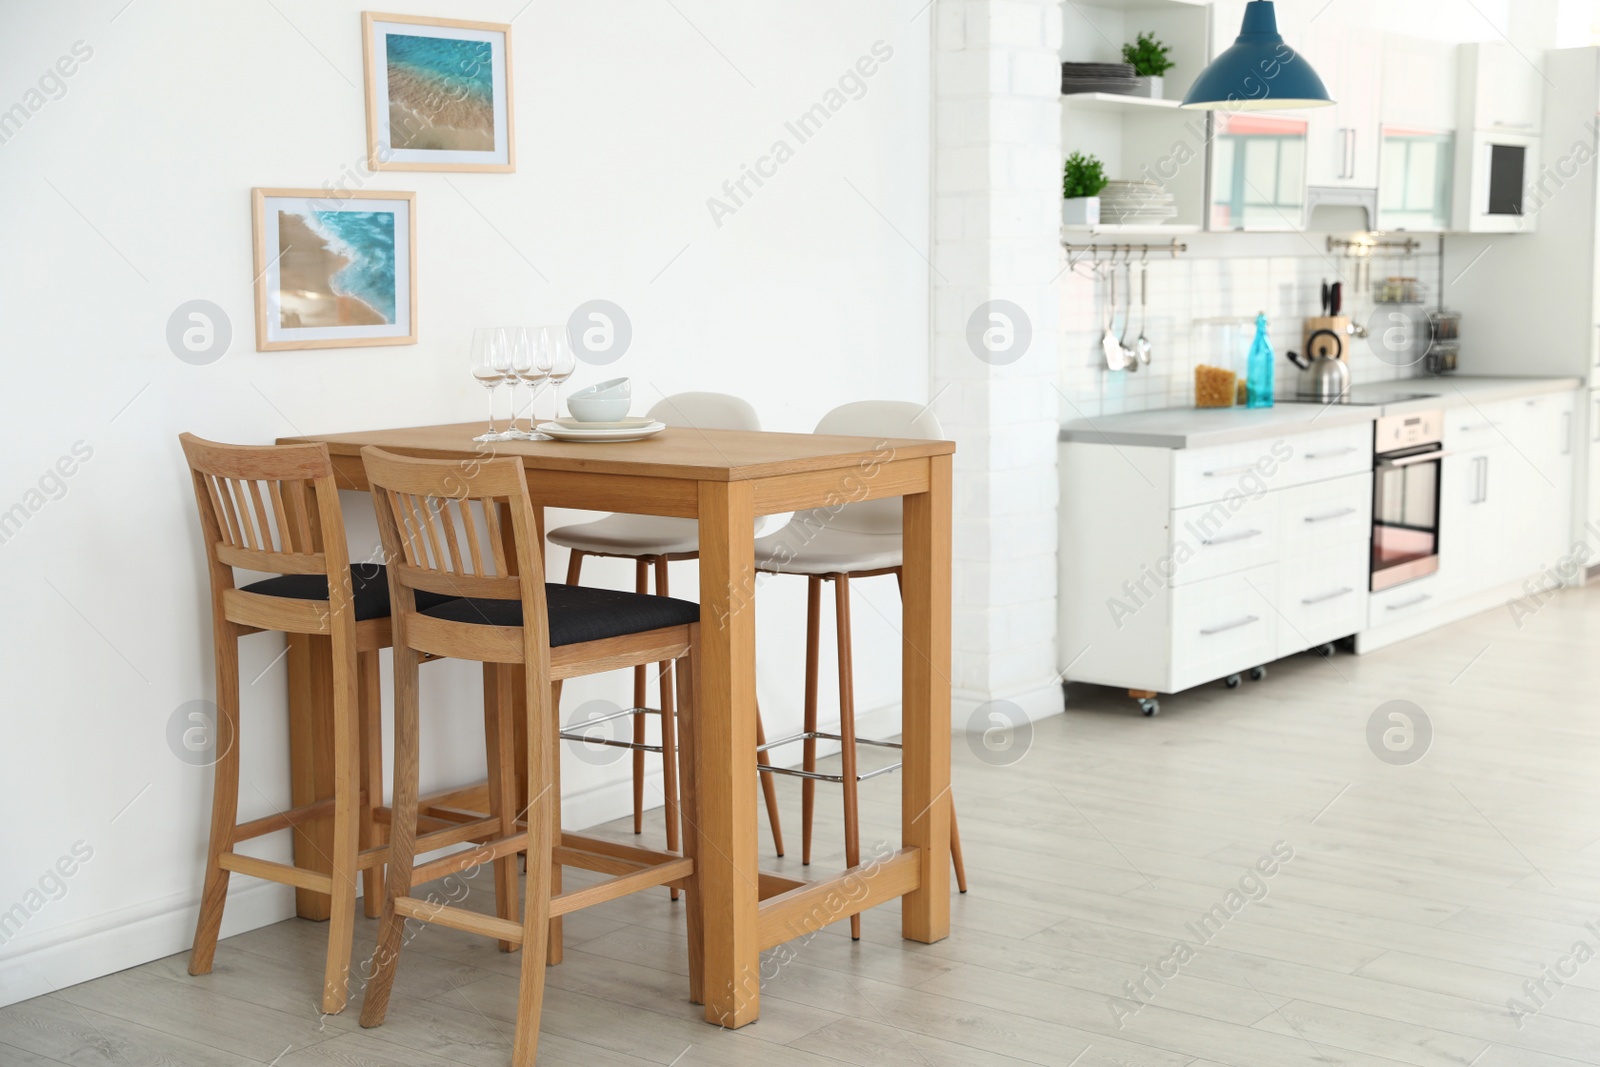 Photo of Stylish kitchen interior with dining table and bar stools near white wall